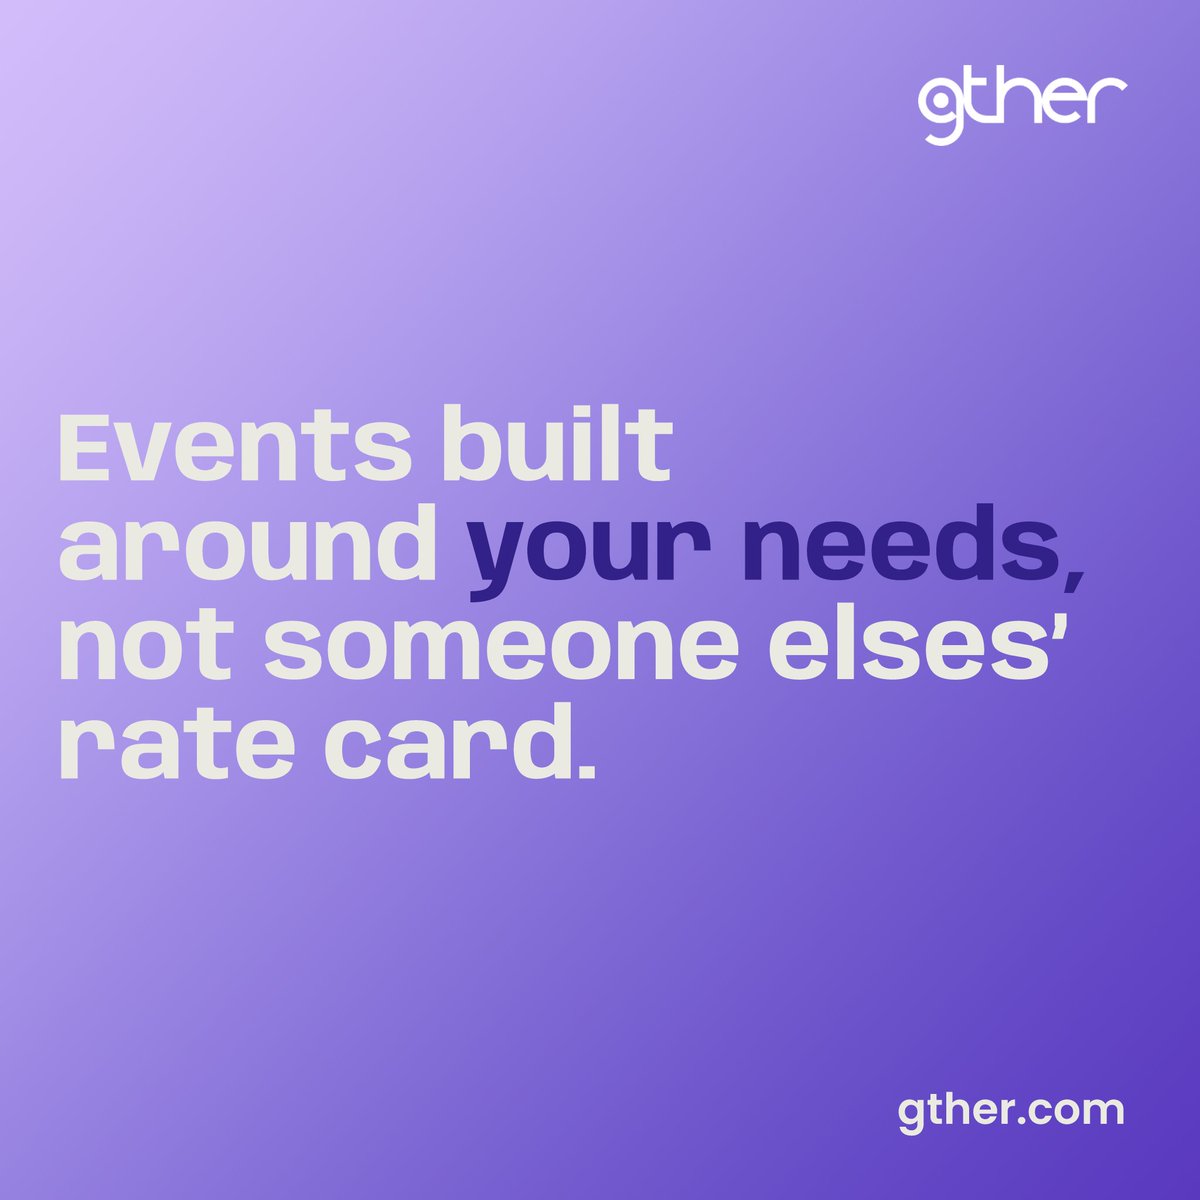 gther. Bridging gaps between your needs and the ideal event. Resolving, not imposing. #EventSolutions #BespokeEvents